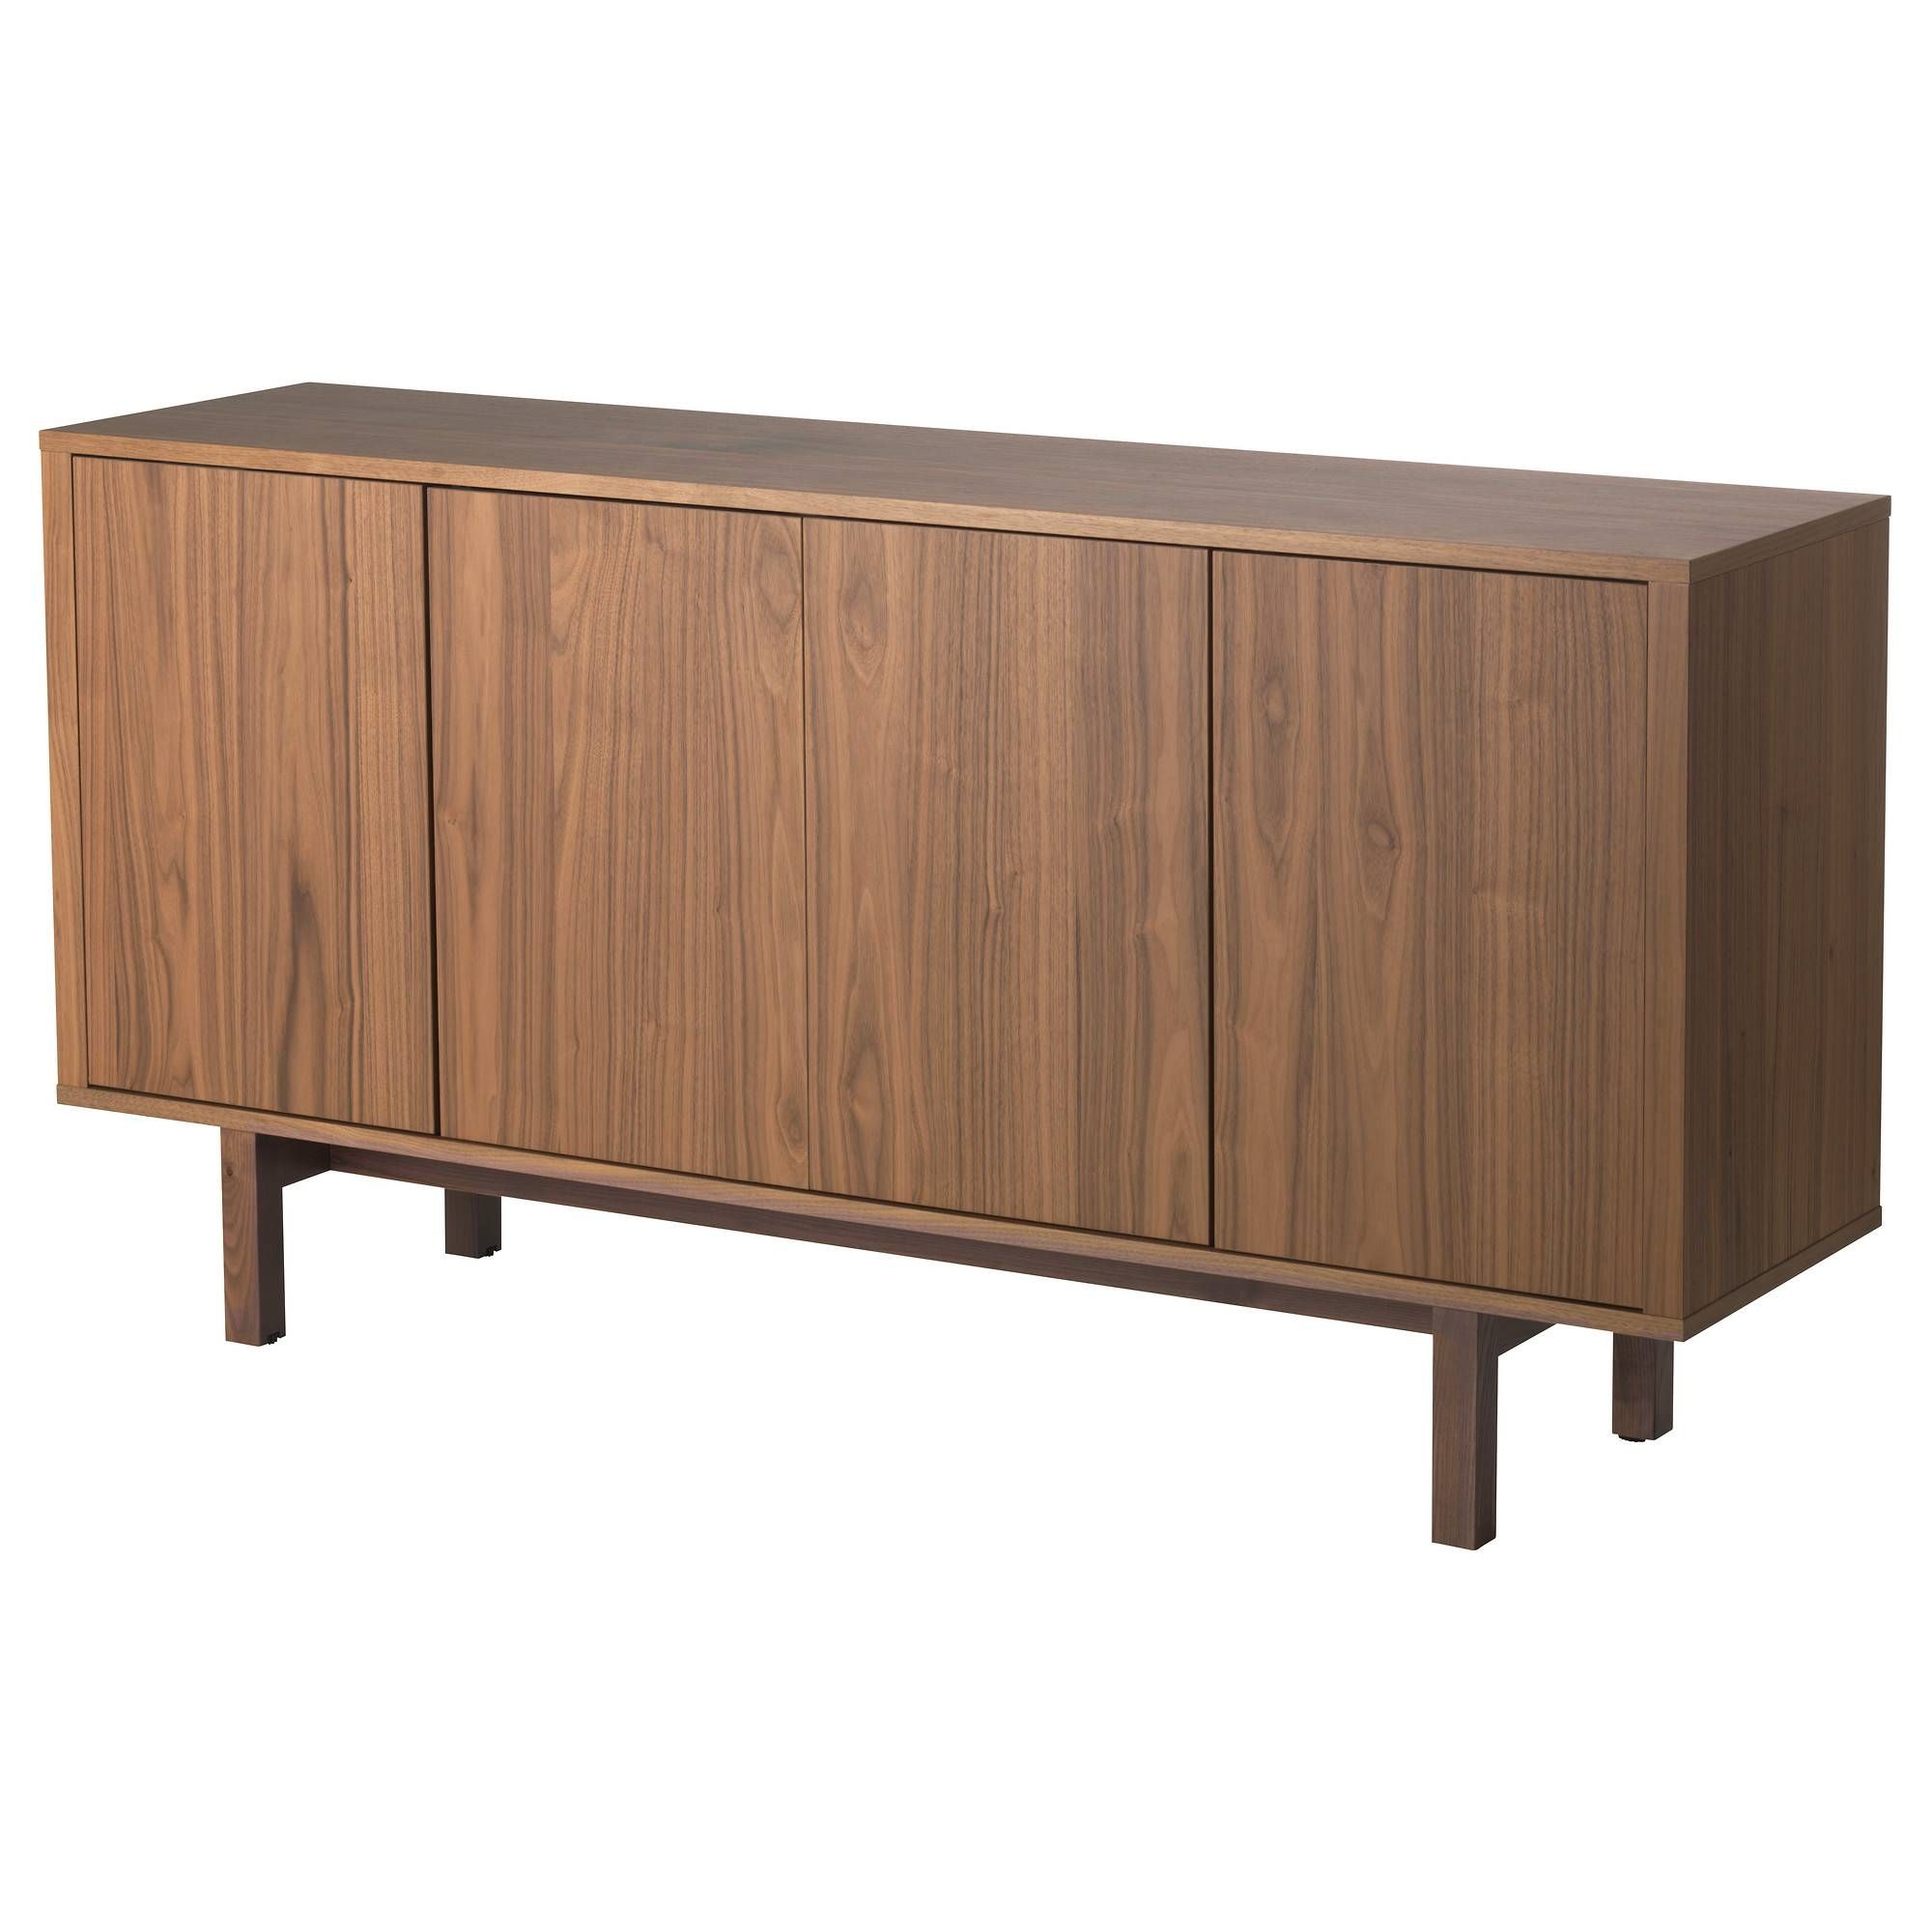 Buffet Tables & Sideboards – Ikea Intended For Slim Sideboards (View 12 of 20)